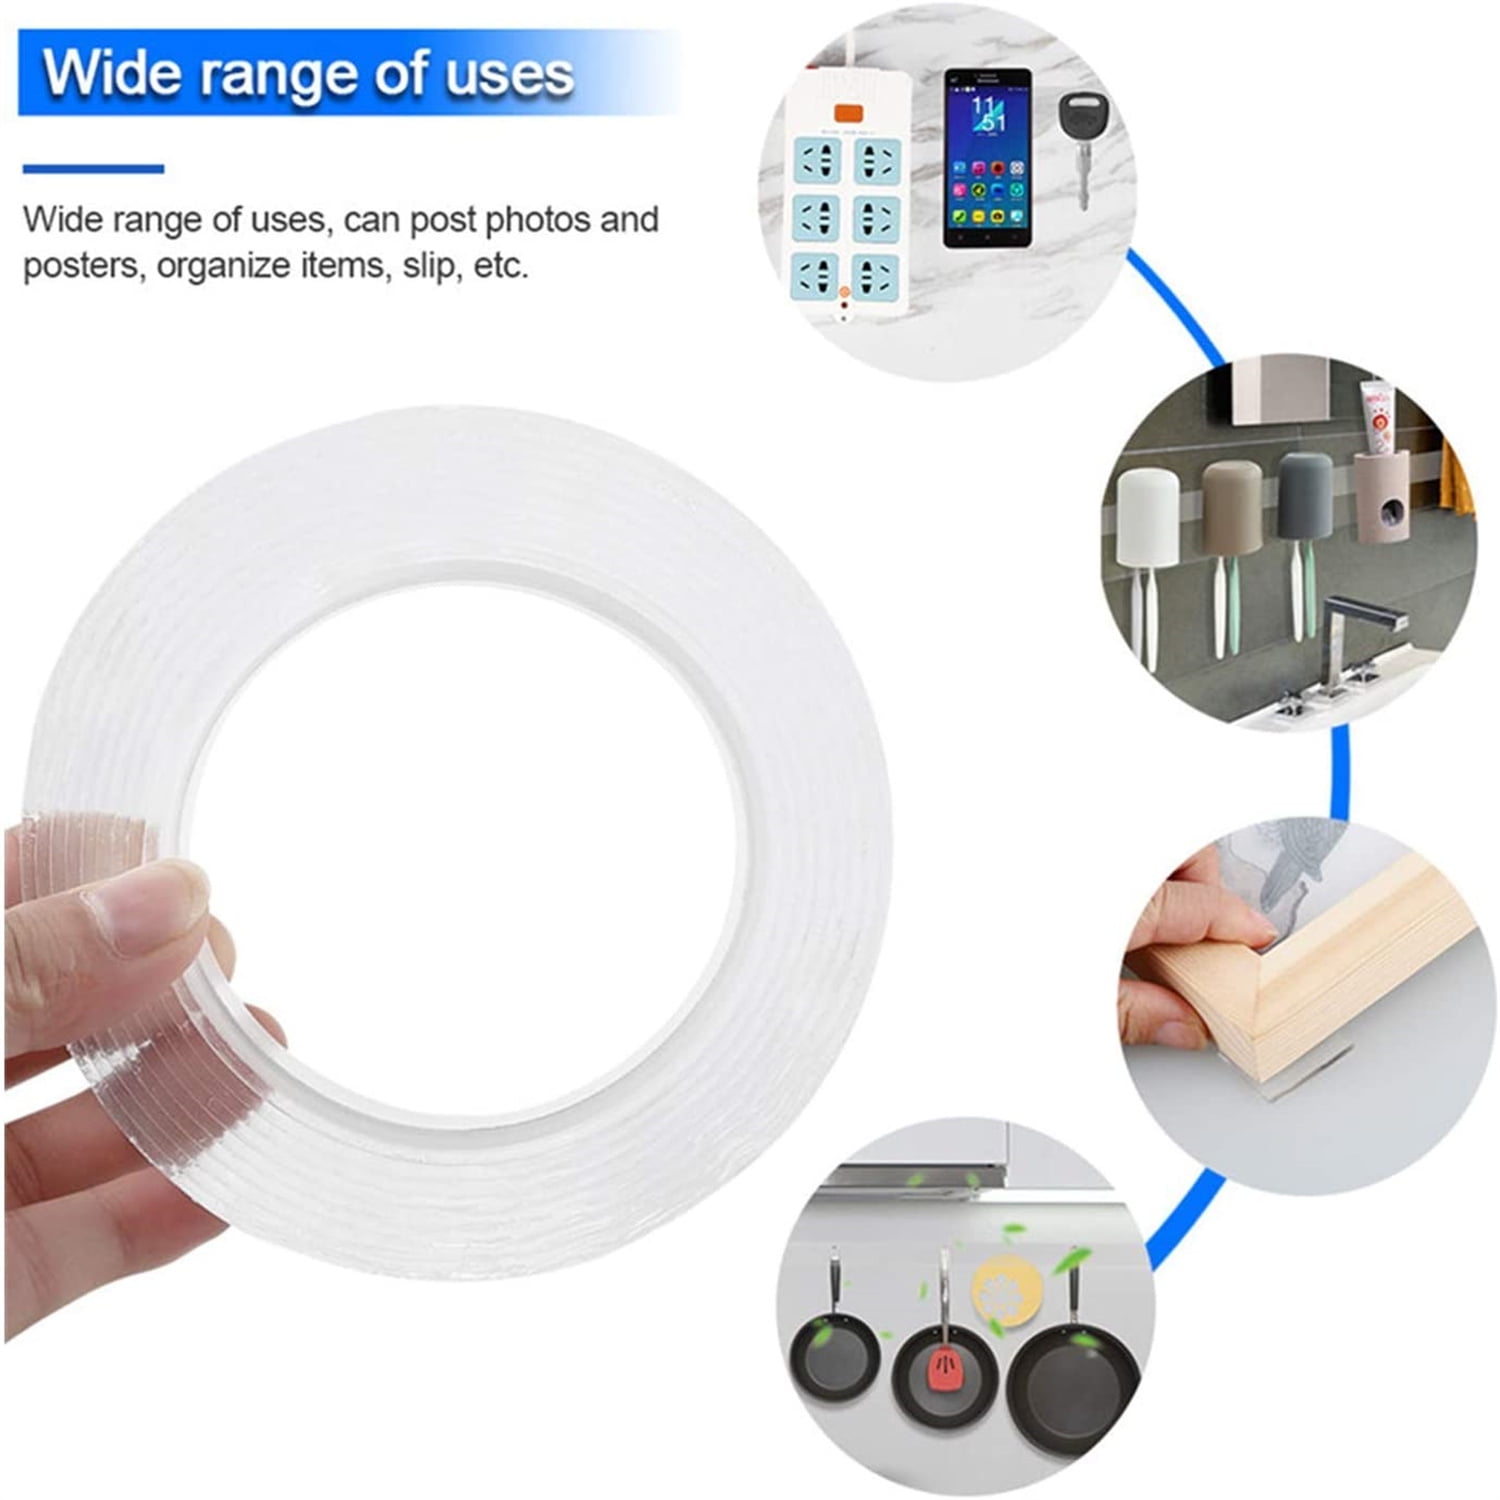 【2019 New】16.5 FT Double Sided Washable Reusable Traceless Tape Heavy Duty Tape for Paste Photos Fix Carpet Mats etc- Multipurpose Magic Nano Removable Adhesive Silicone Tape Clear 